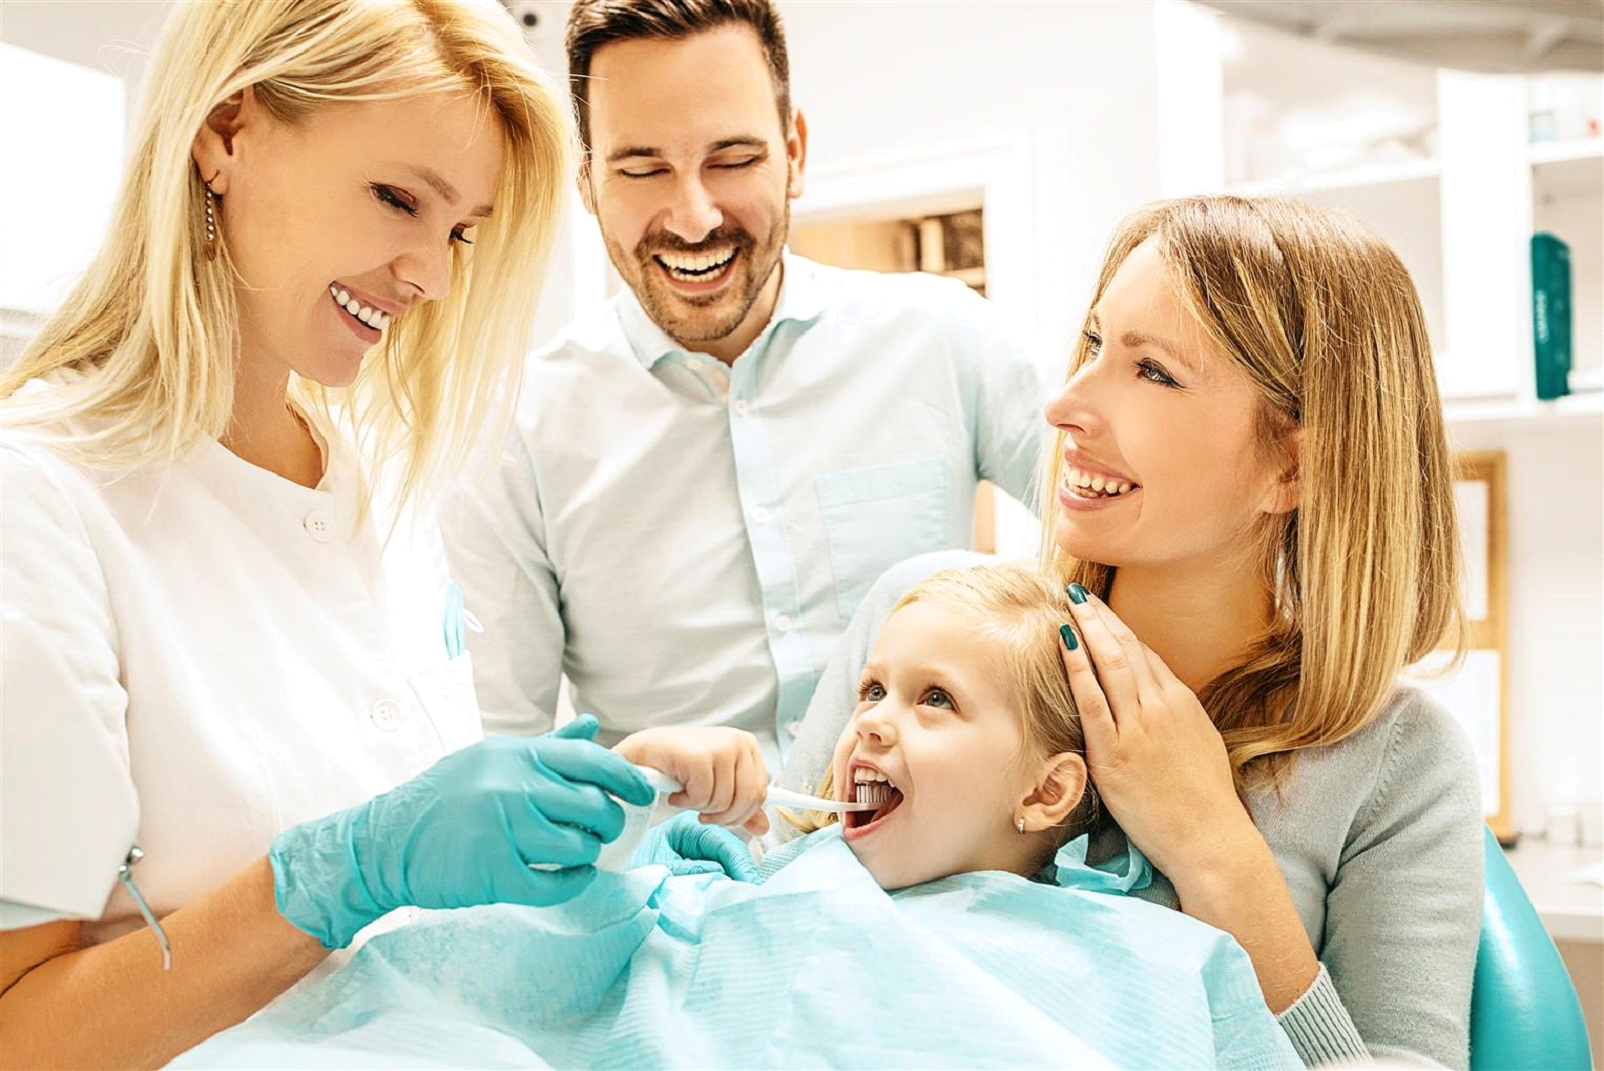 The family is so happy while the child is having her dental procedure